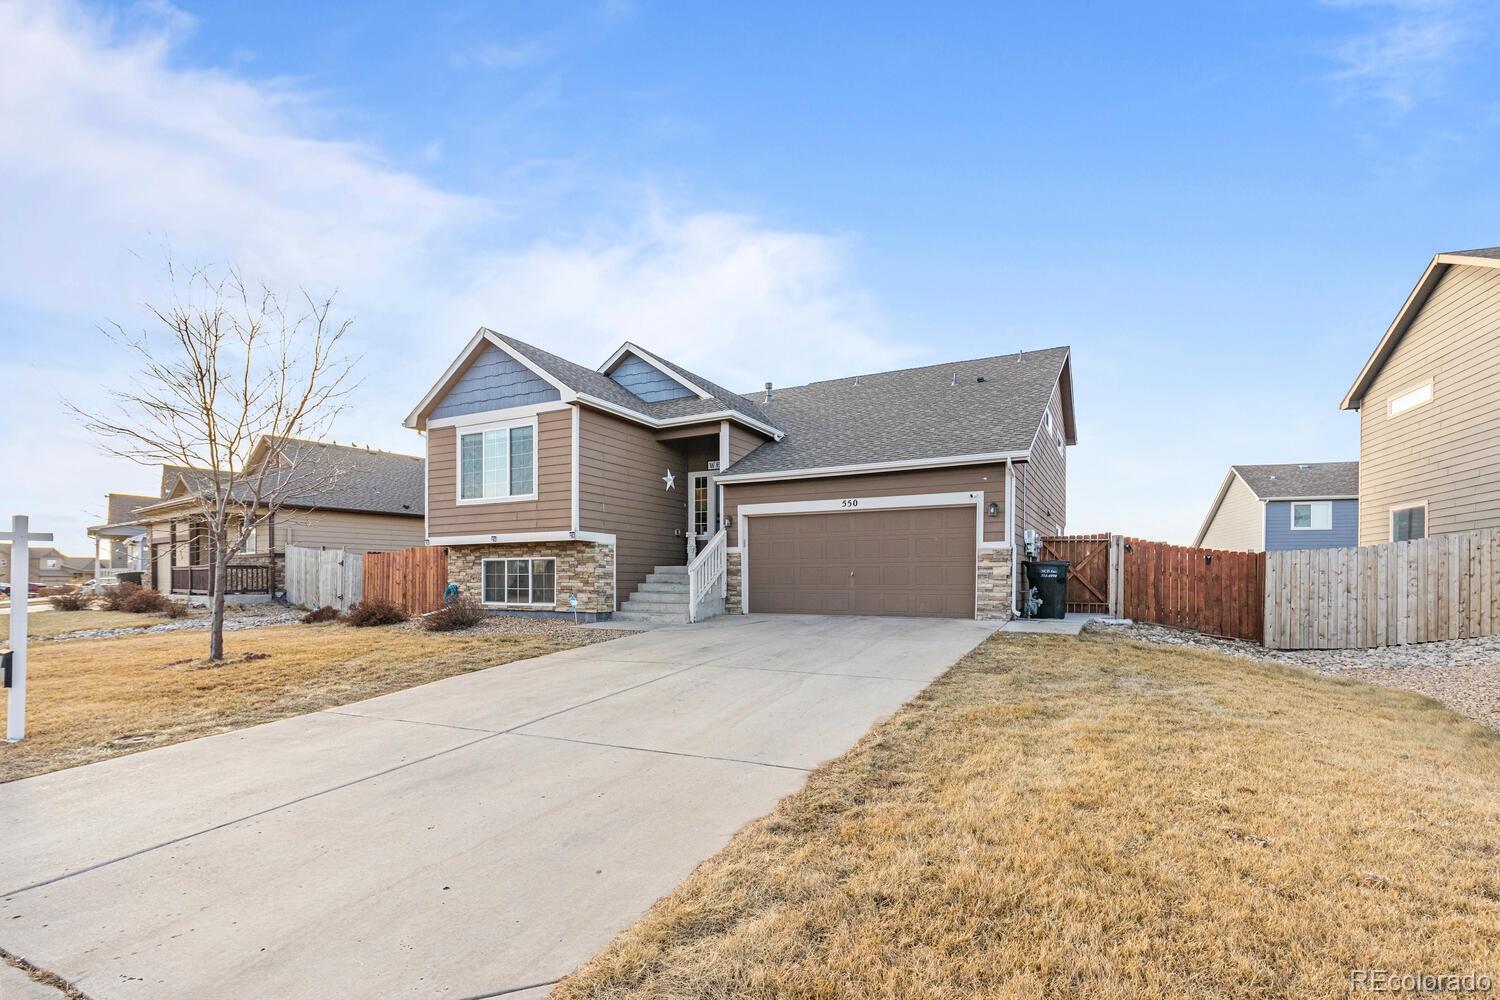 550 e 28th street road, greeley sold home. Closed on 2024-02-13 for $422,000.